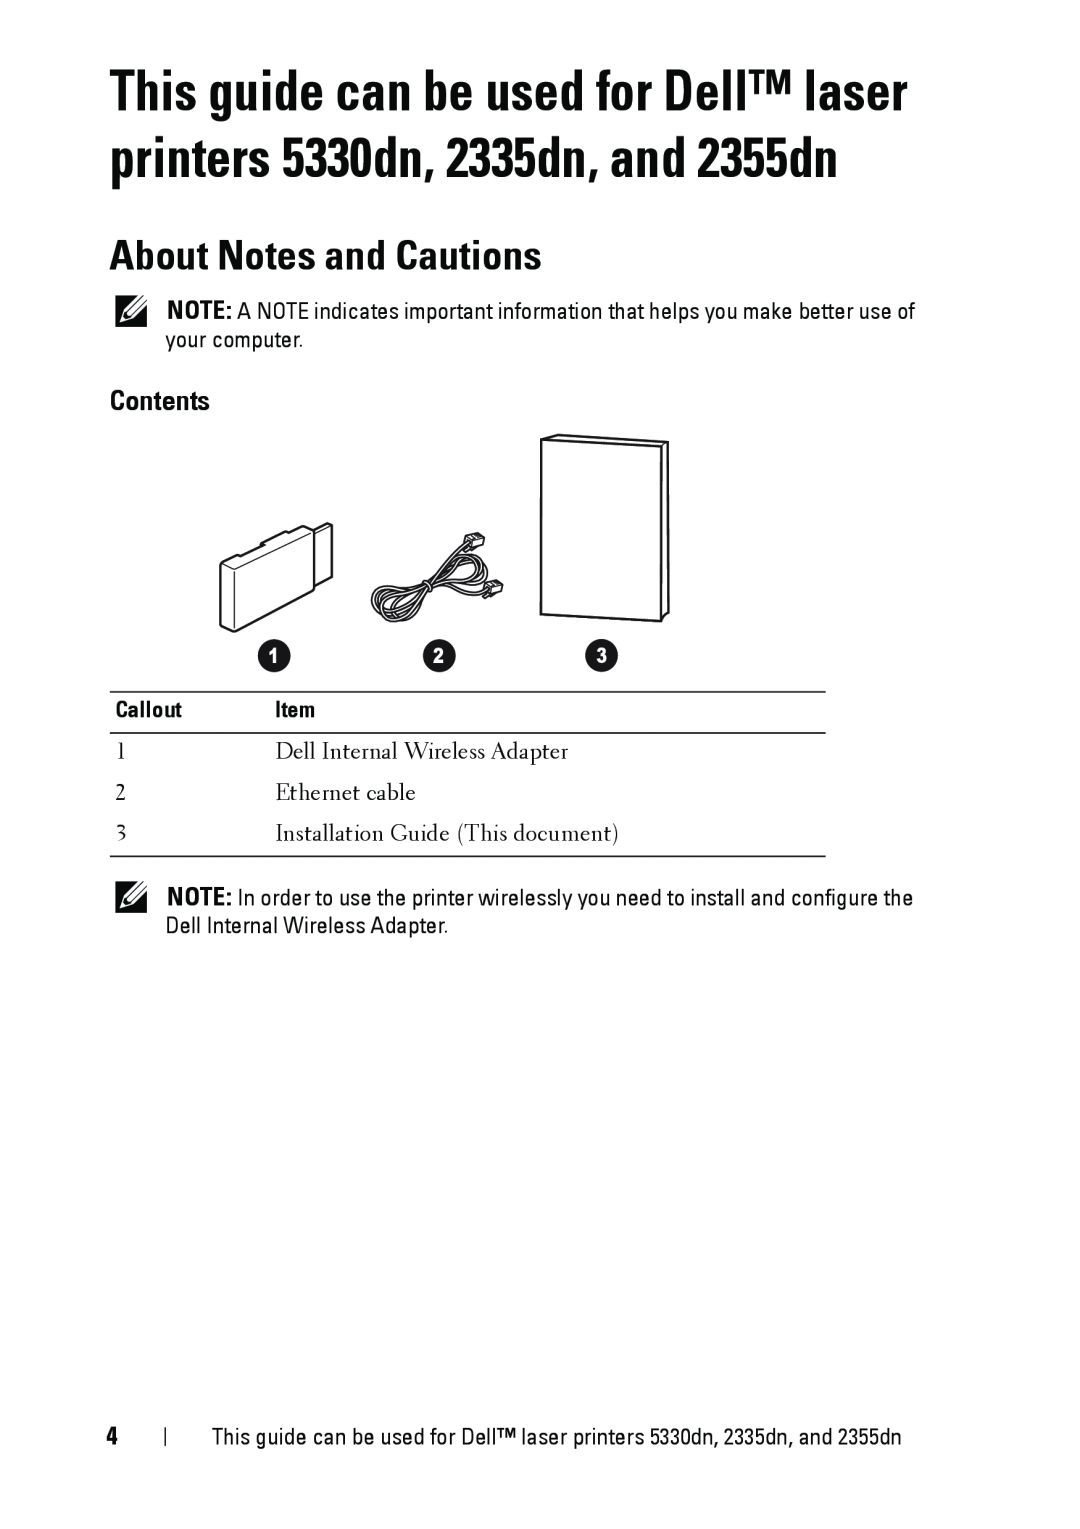 Dell 5002 manual About Notes and Cautions, Contents 